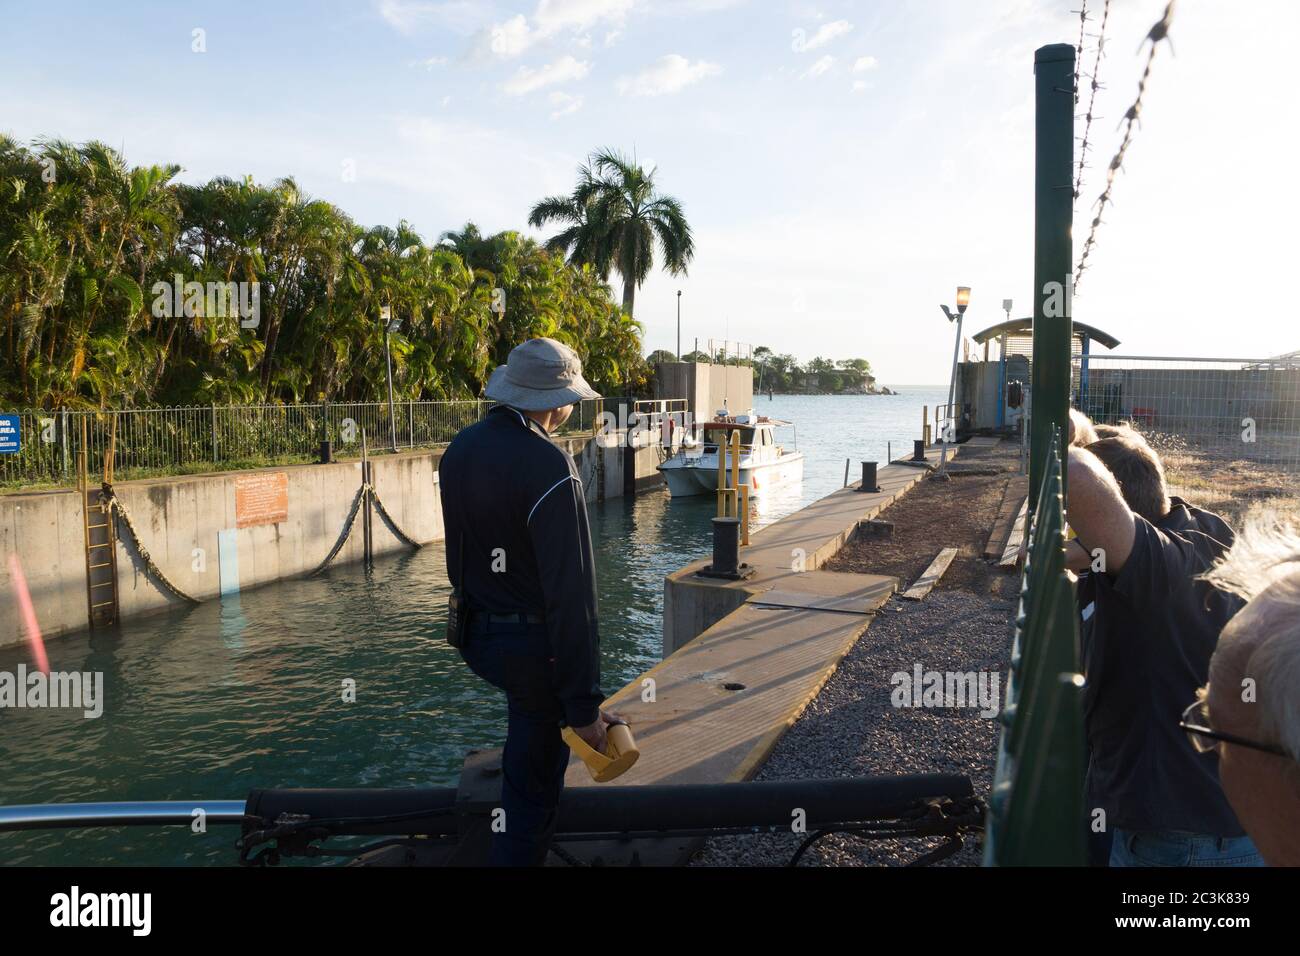 Cullen Bay Lock in operation as a boat comes into the marina in Darwin, Northern Territory, Australia Stock Photo